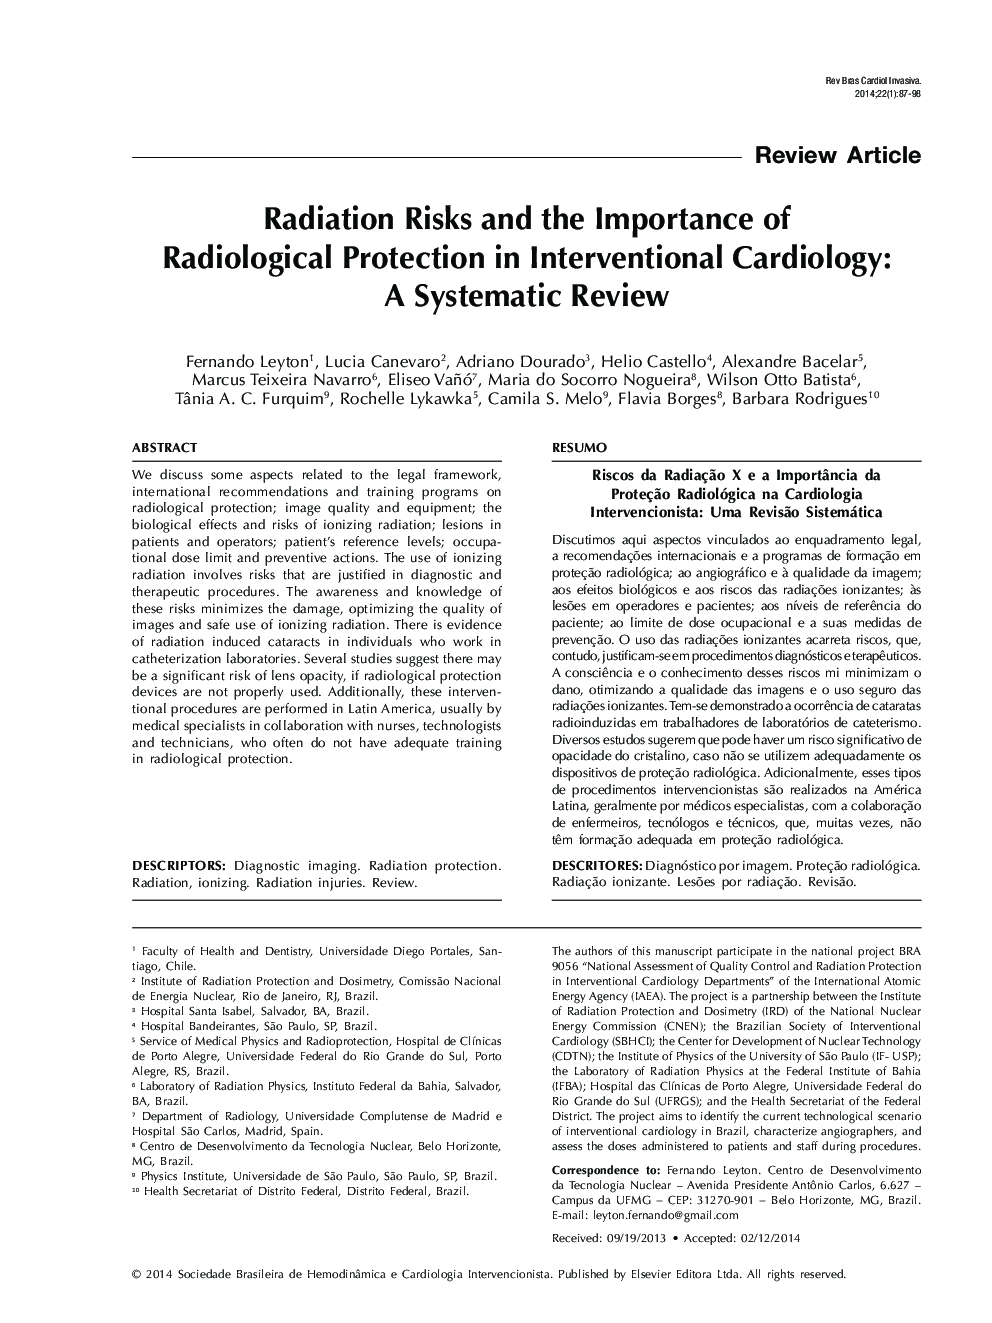 Radiation Risks and the Importance of Radiological Protection in Interventional Cardiology: A Systematic Review